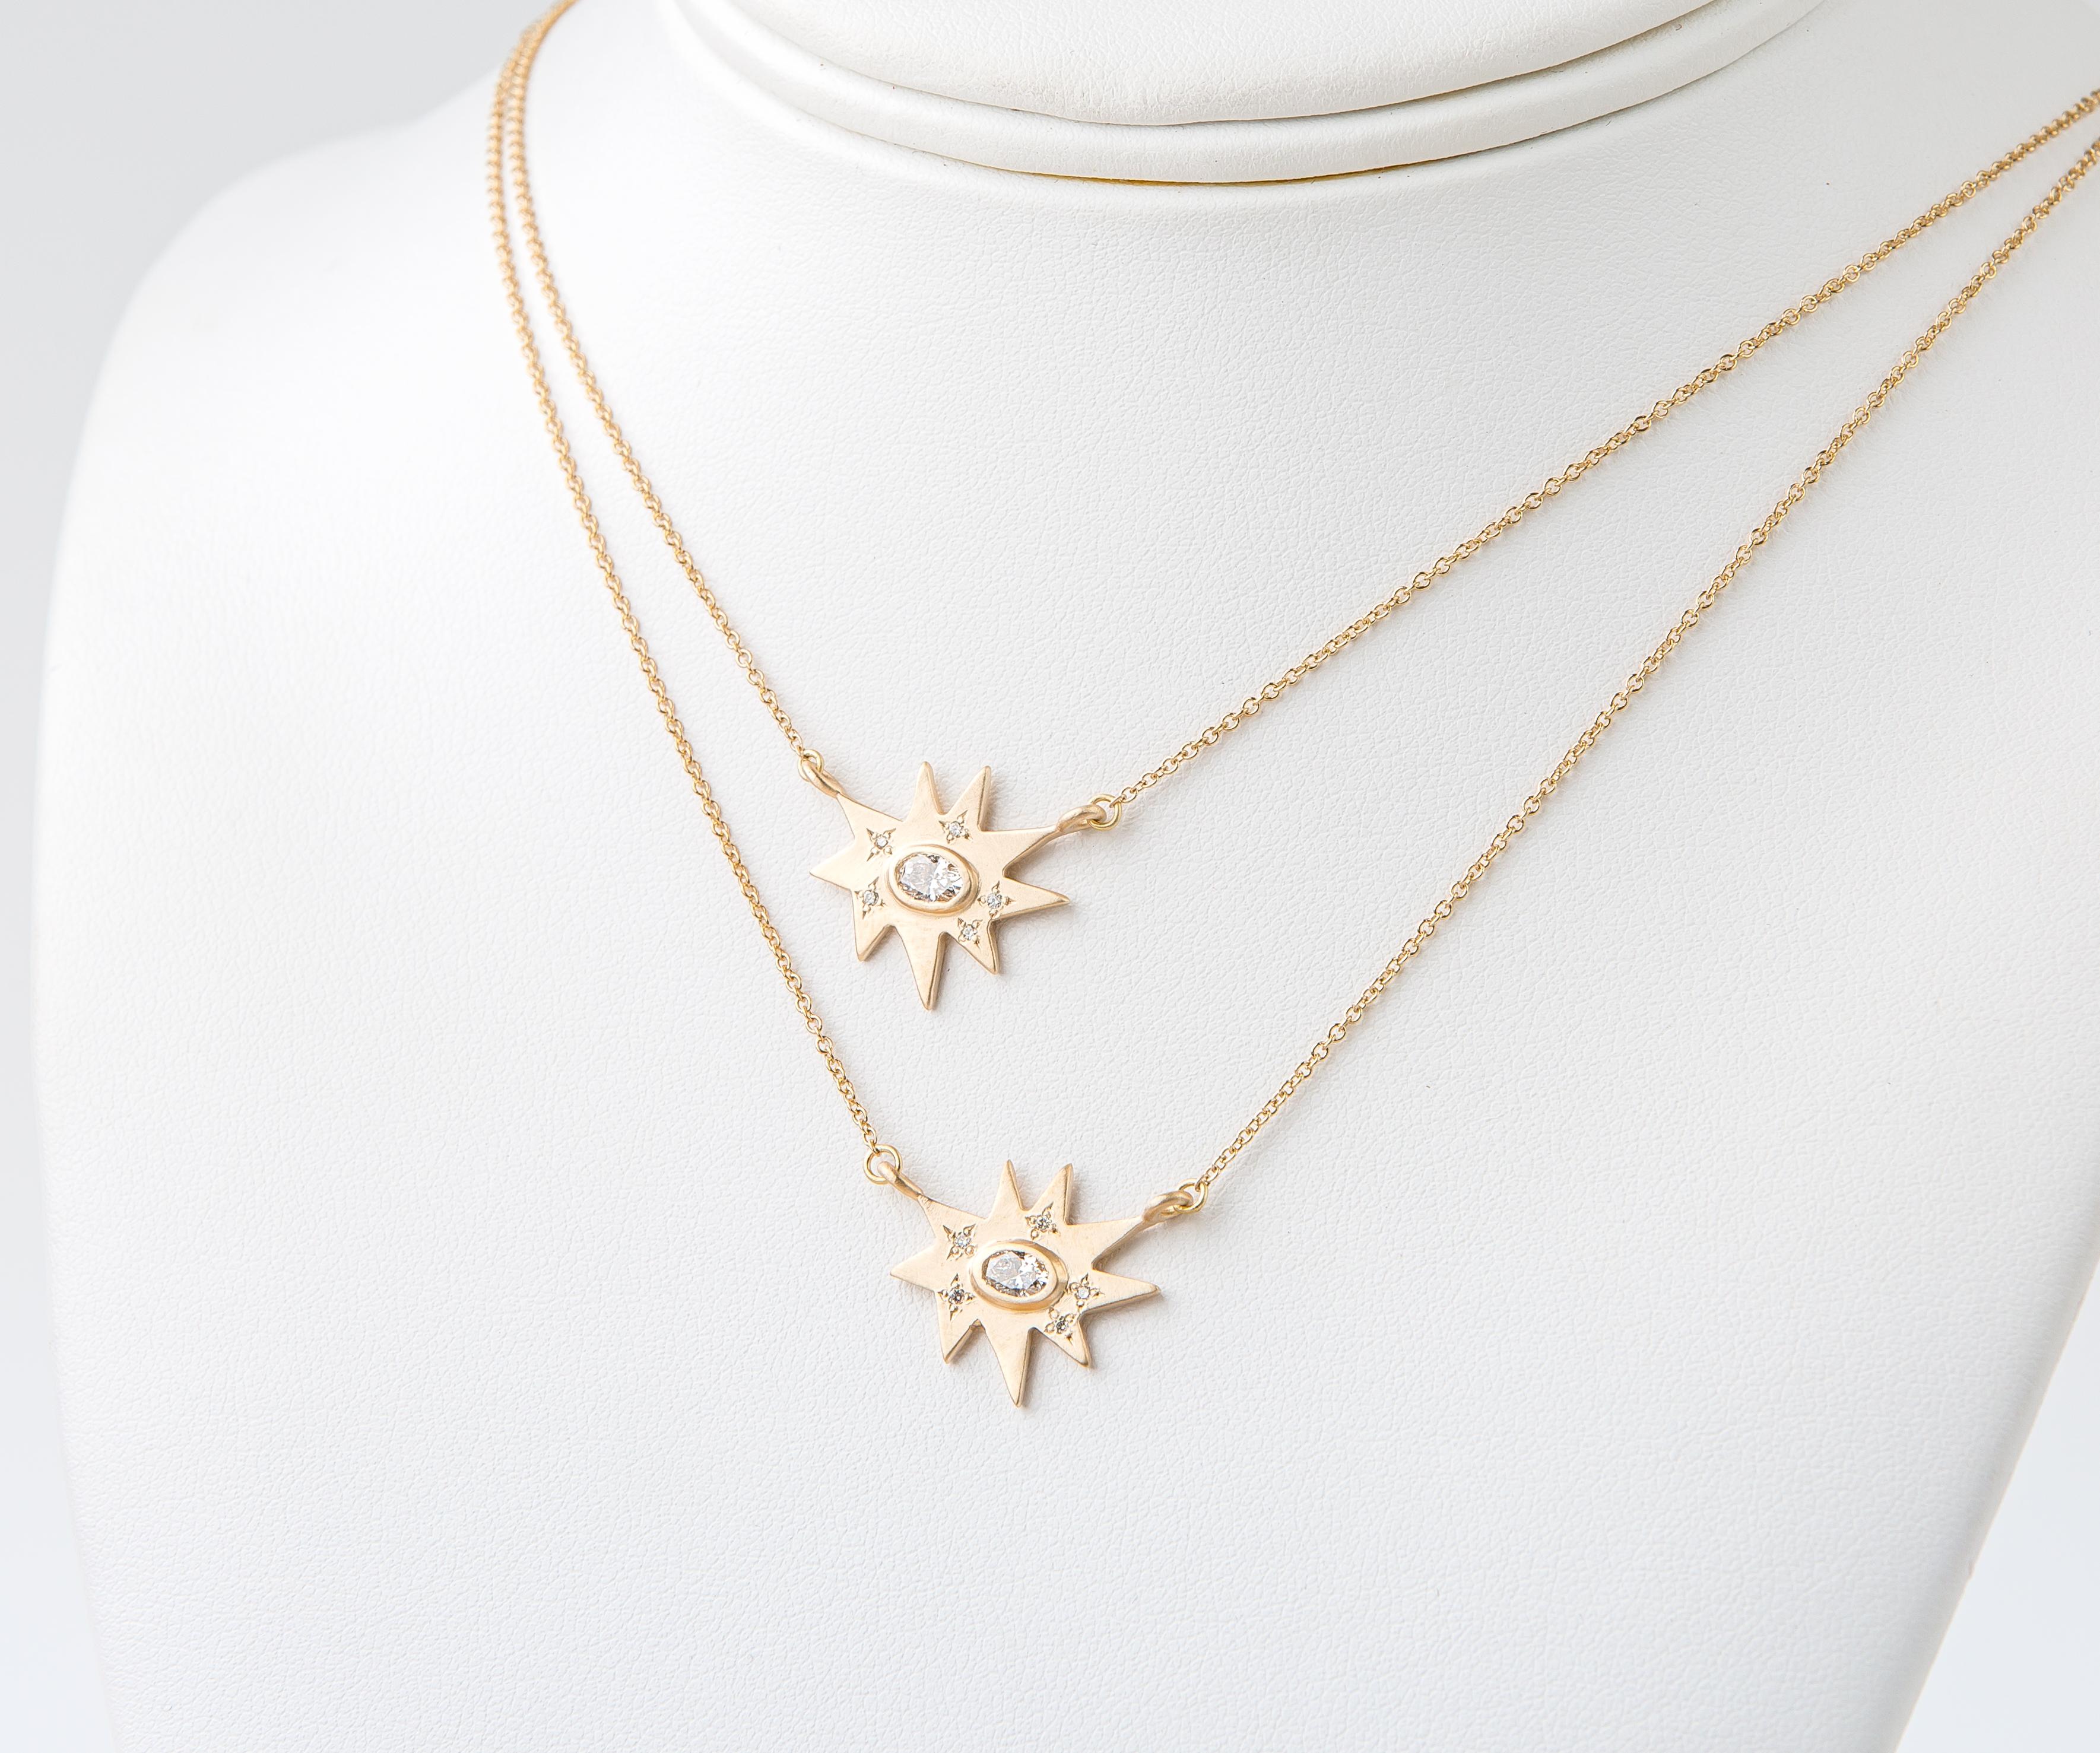 Contemporary Emily Kuvin Gold and Diamond Star Necklace For Sale